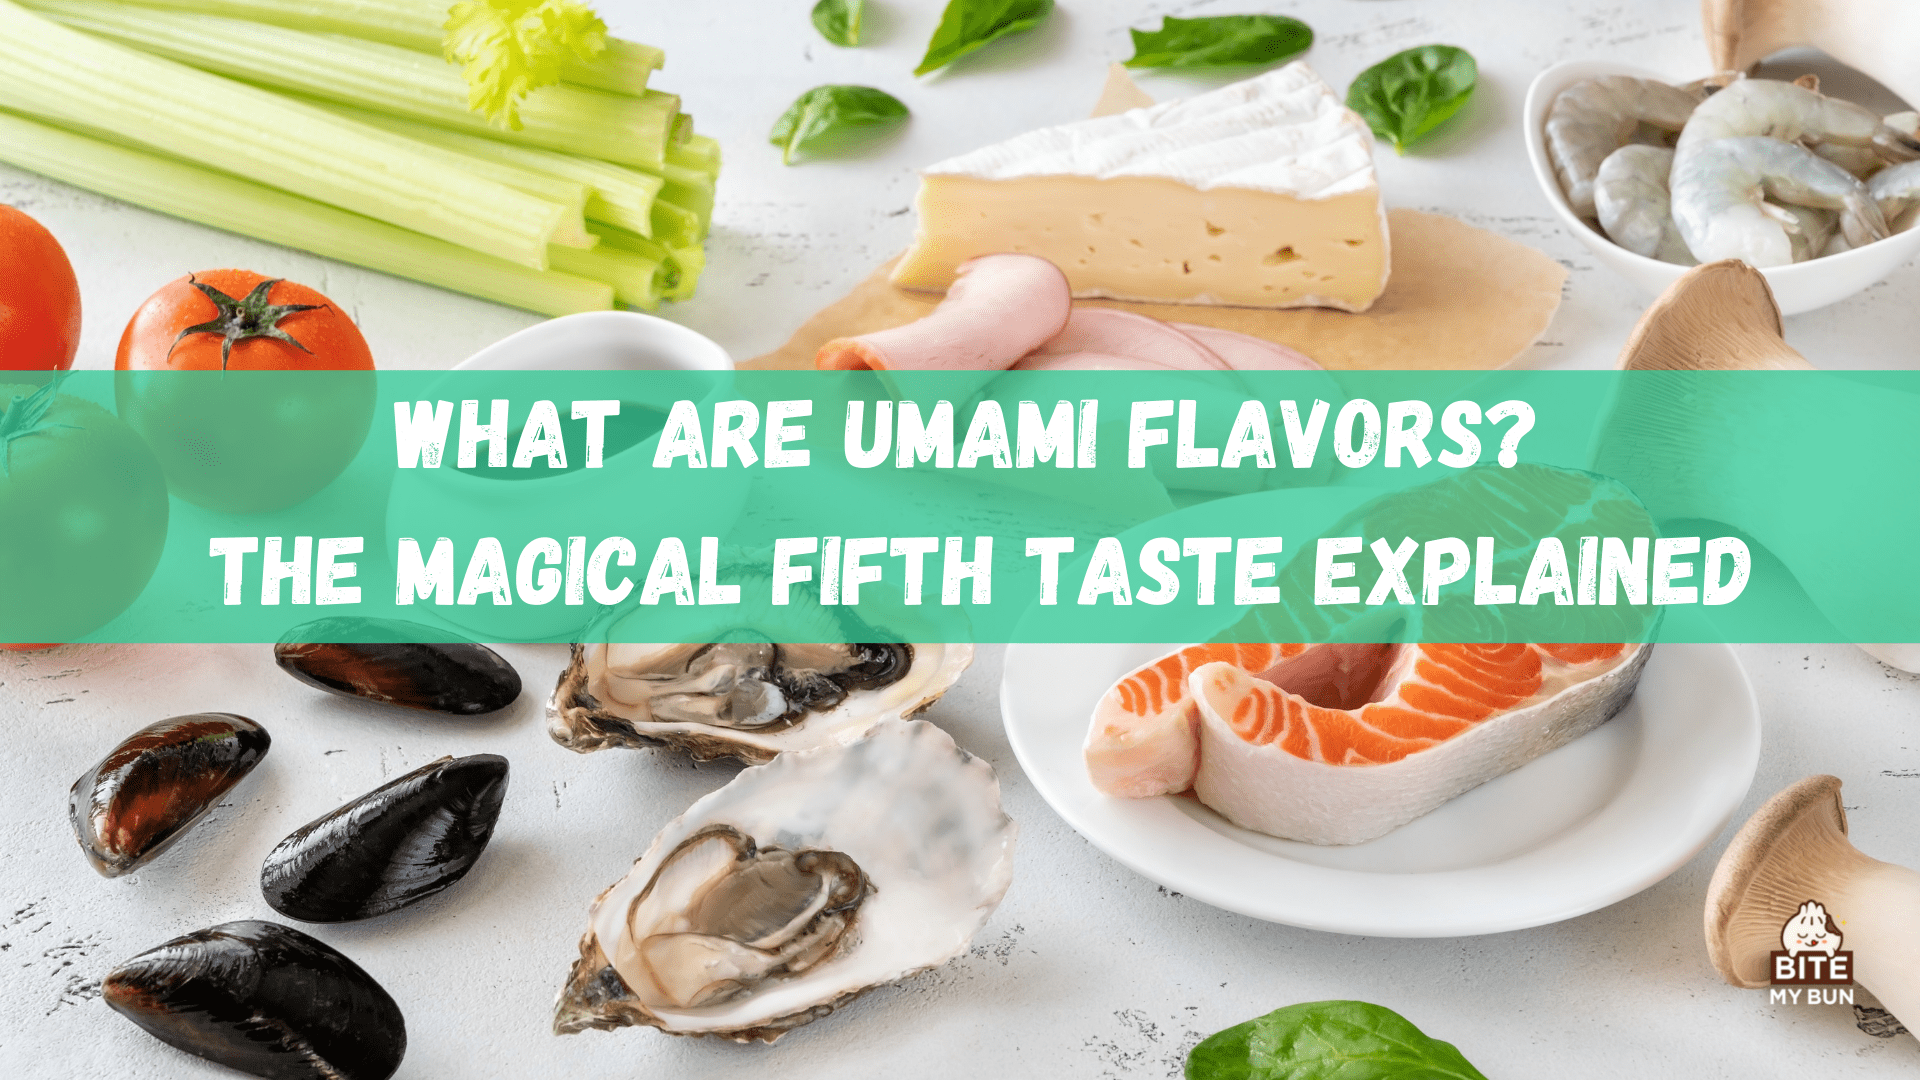 What are umami flavors? The magical fifth taste explained